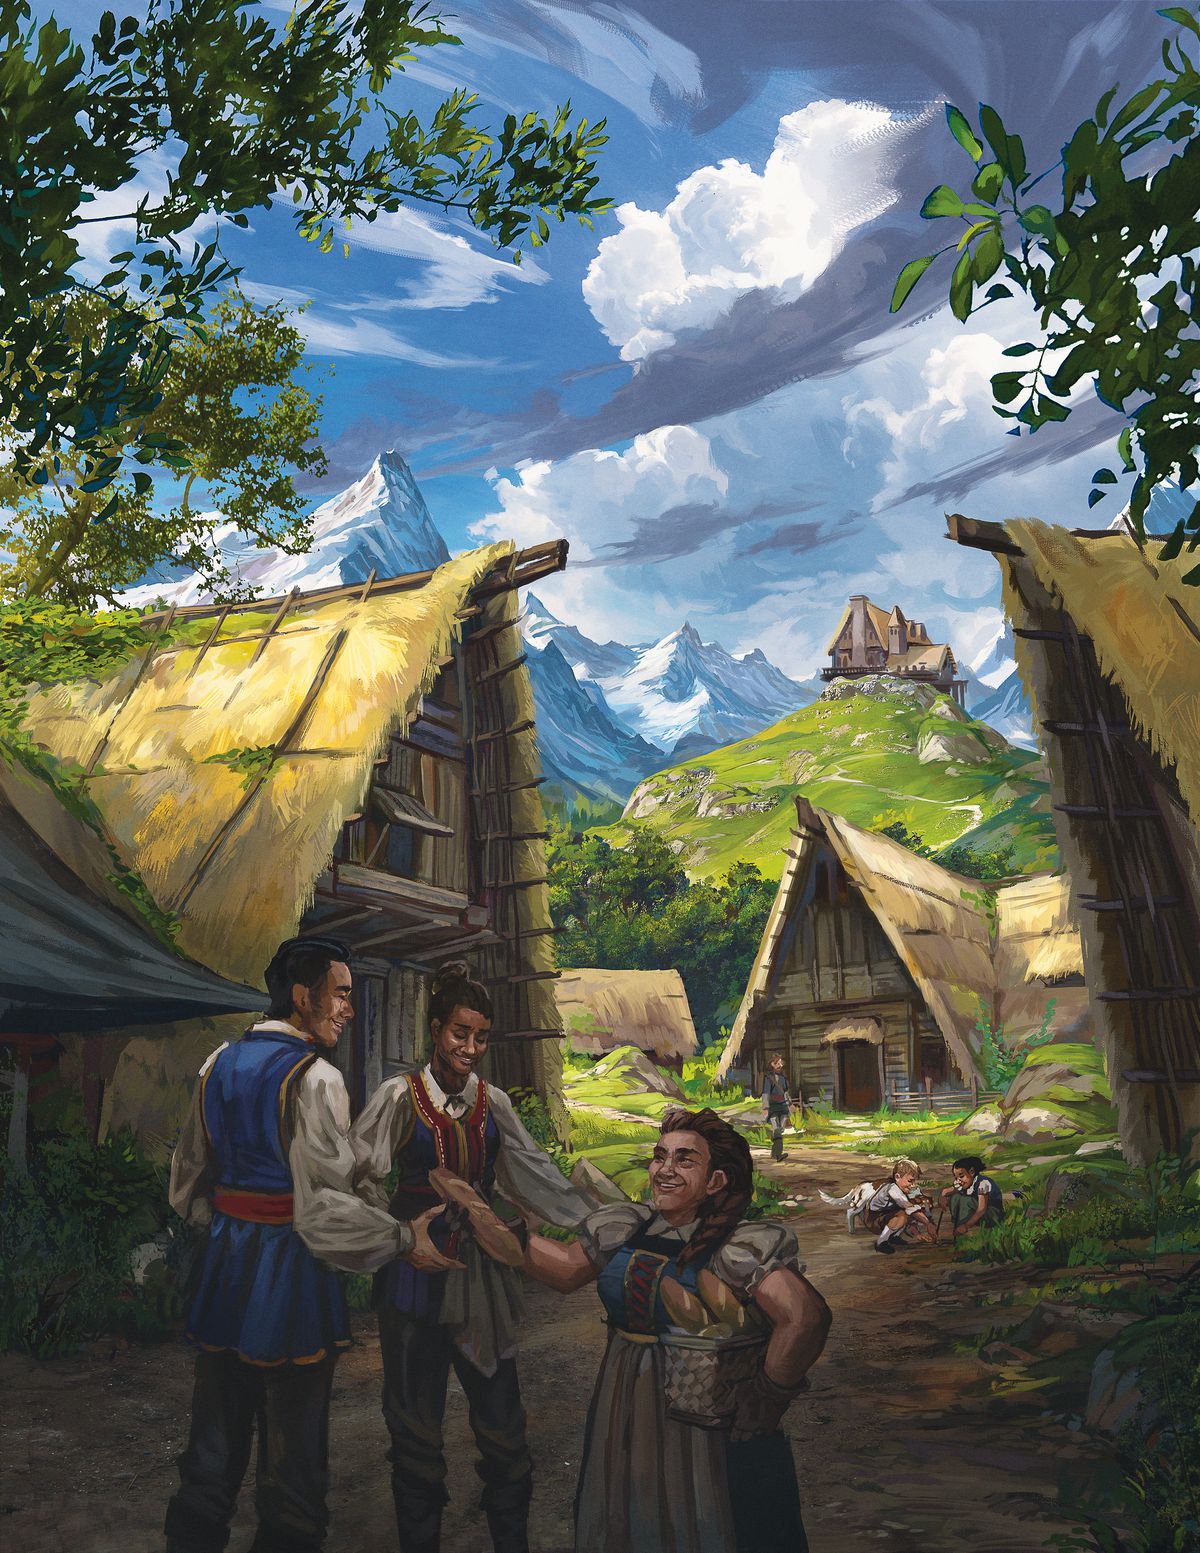 A mountain town nestled in a valley. Two men receive bread from a dwarf women in the foreground. The sky is blue. Key art from D&amp;D’s Phandelver and Below.